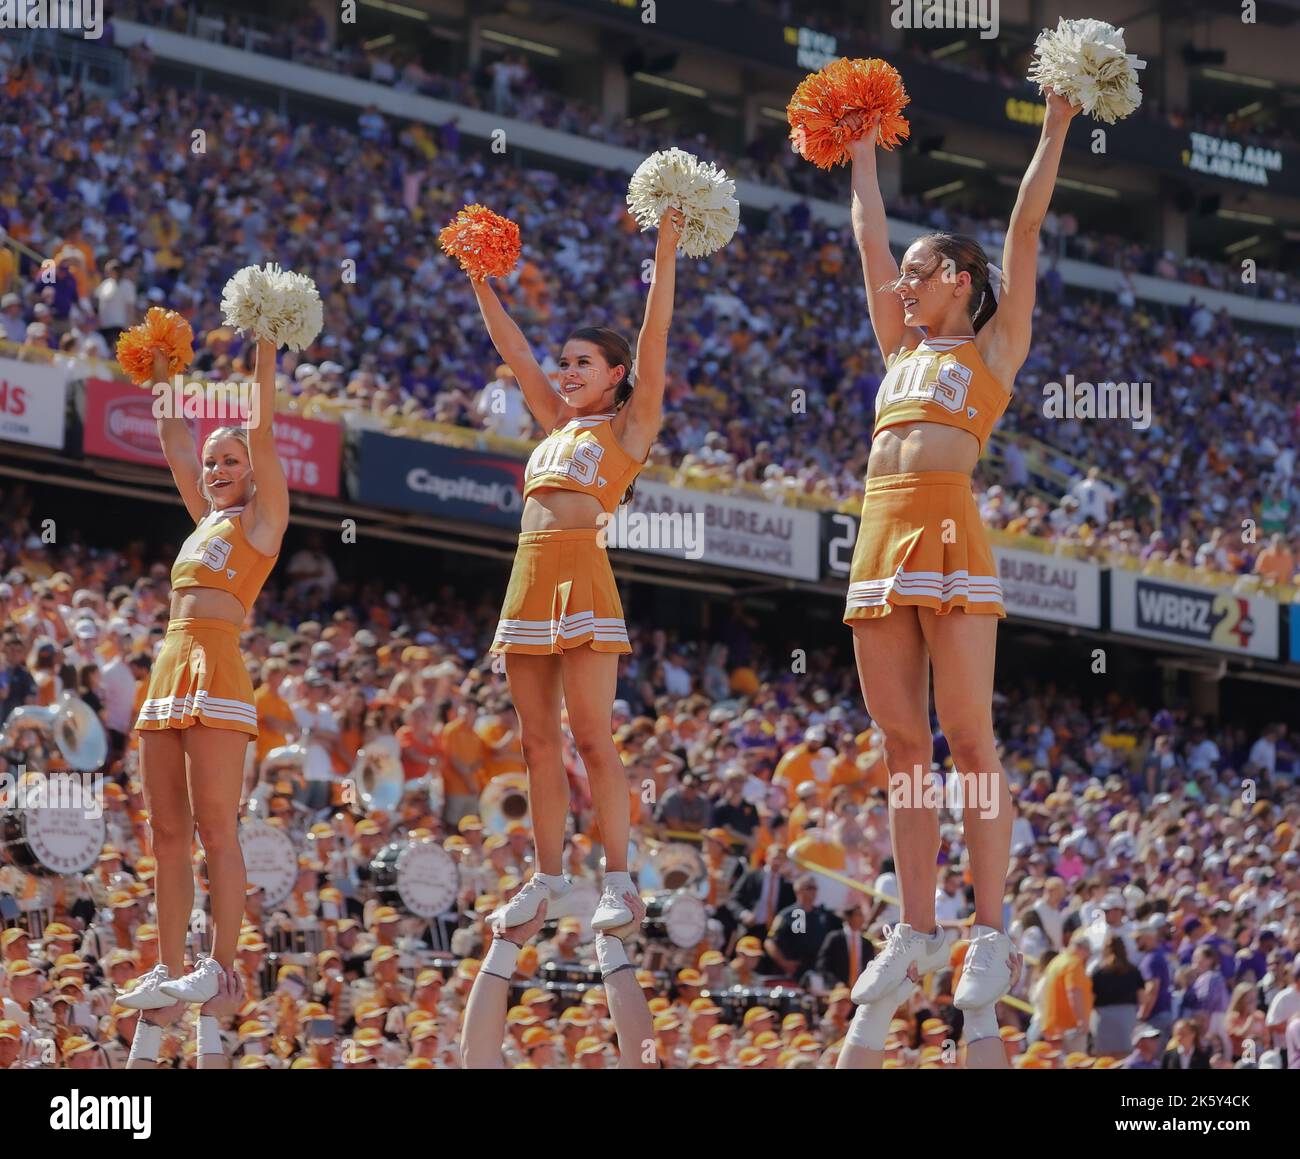 Baton Rouge, LA, USA. 8th Oct, 2022. The Tennessee cheerleaders perform for the Volunteer crowd during the NCAA football game between the Tennessee Volunteers and LSU Tigers at Tiger Stadium in Baton Rouge, LA. Kyle Okita/CSM/Alamy Live News Stock Photo